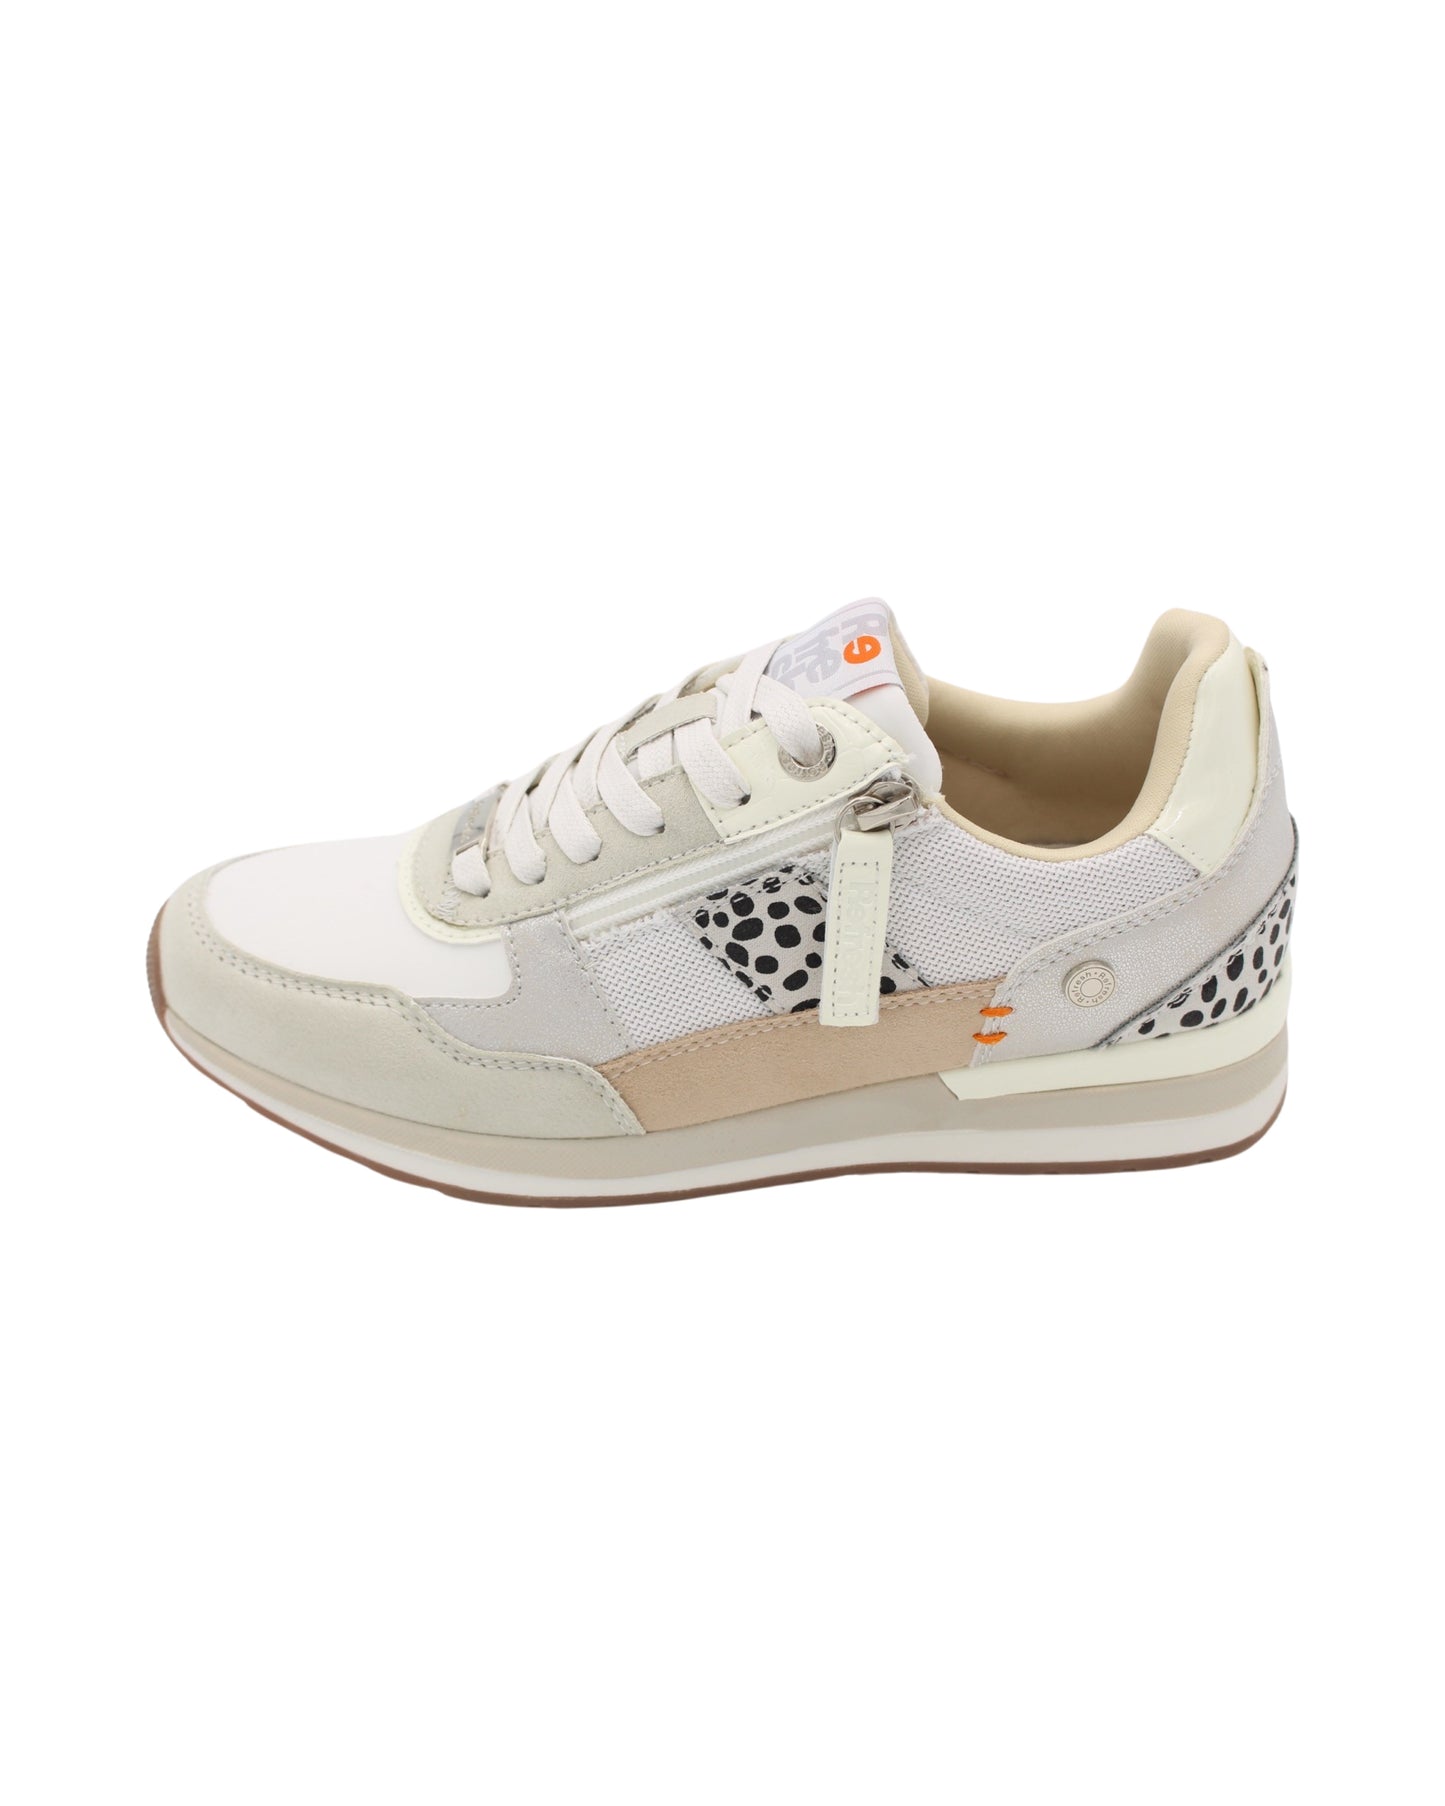 Refresh - Ladies Shoes Trainers White Multi (1978)